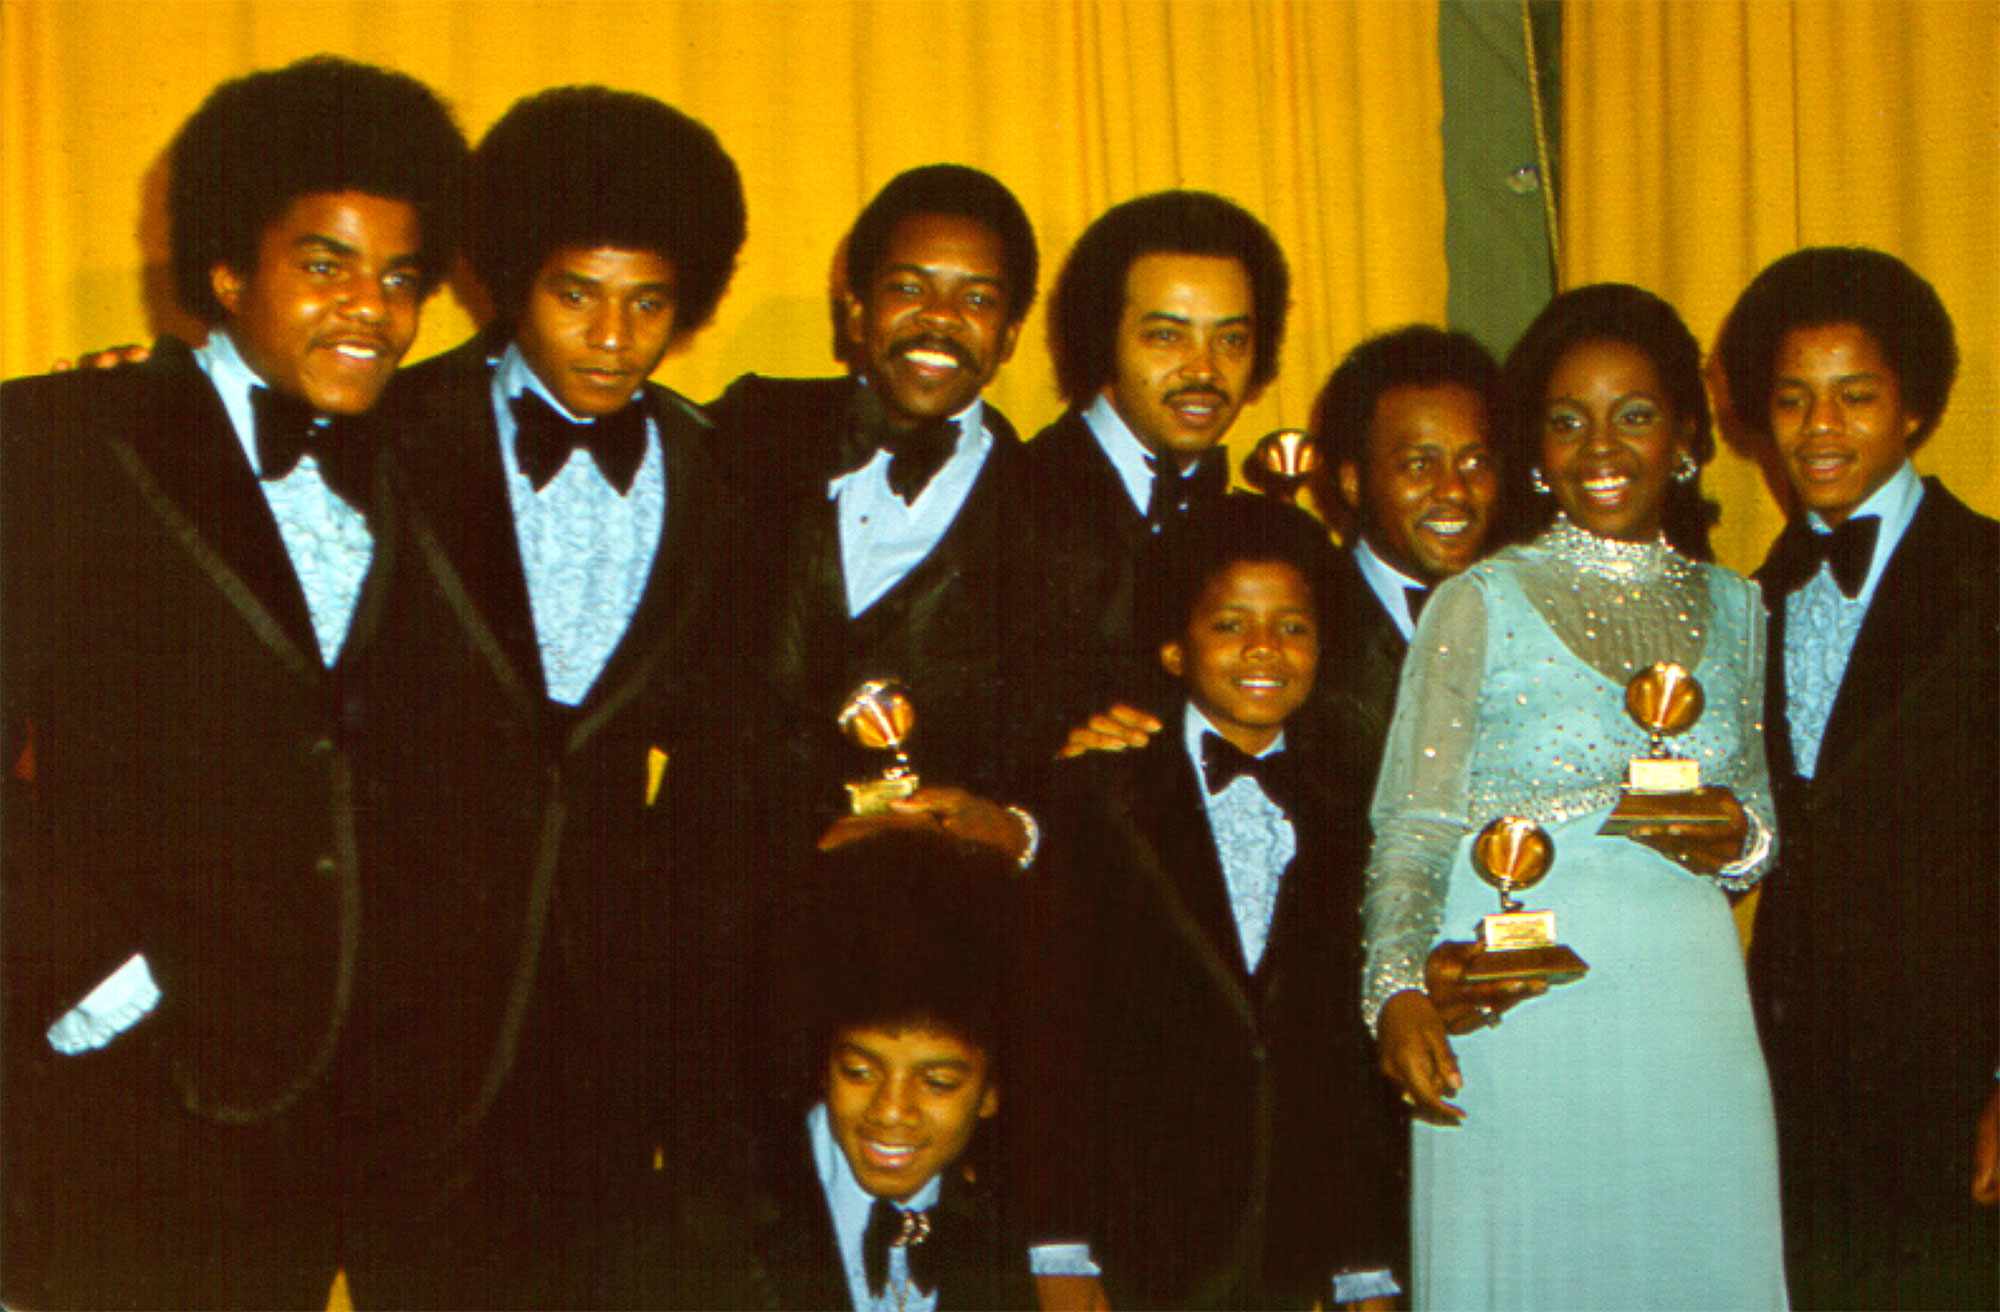 Jackson 5 & Gladys Knight & The Pips At The Grammys